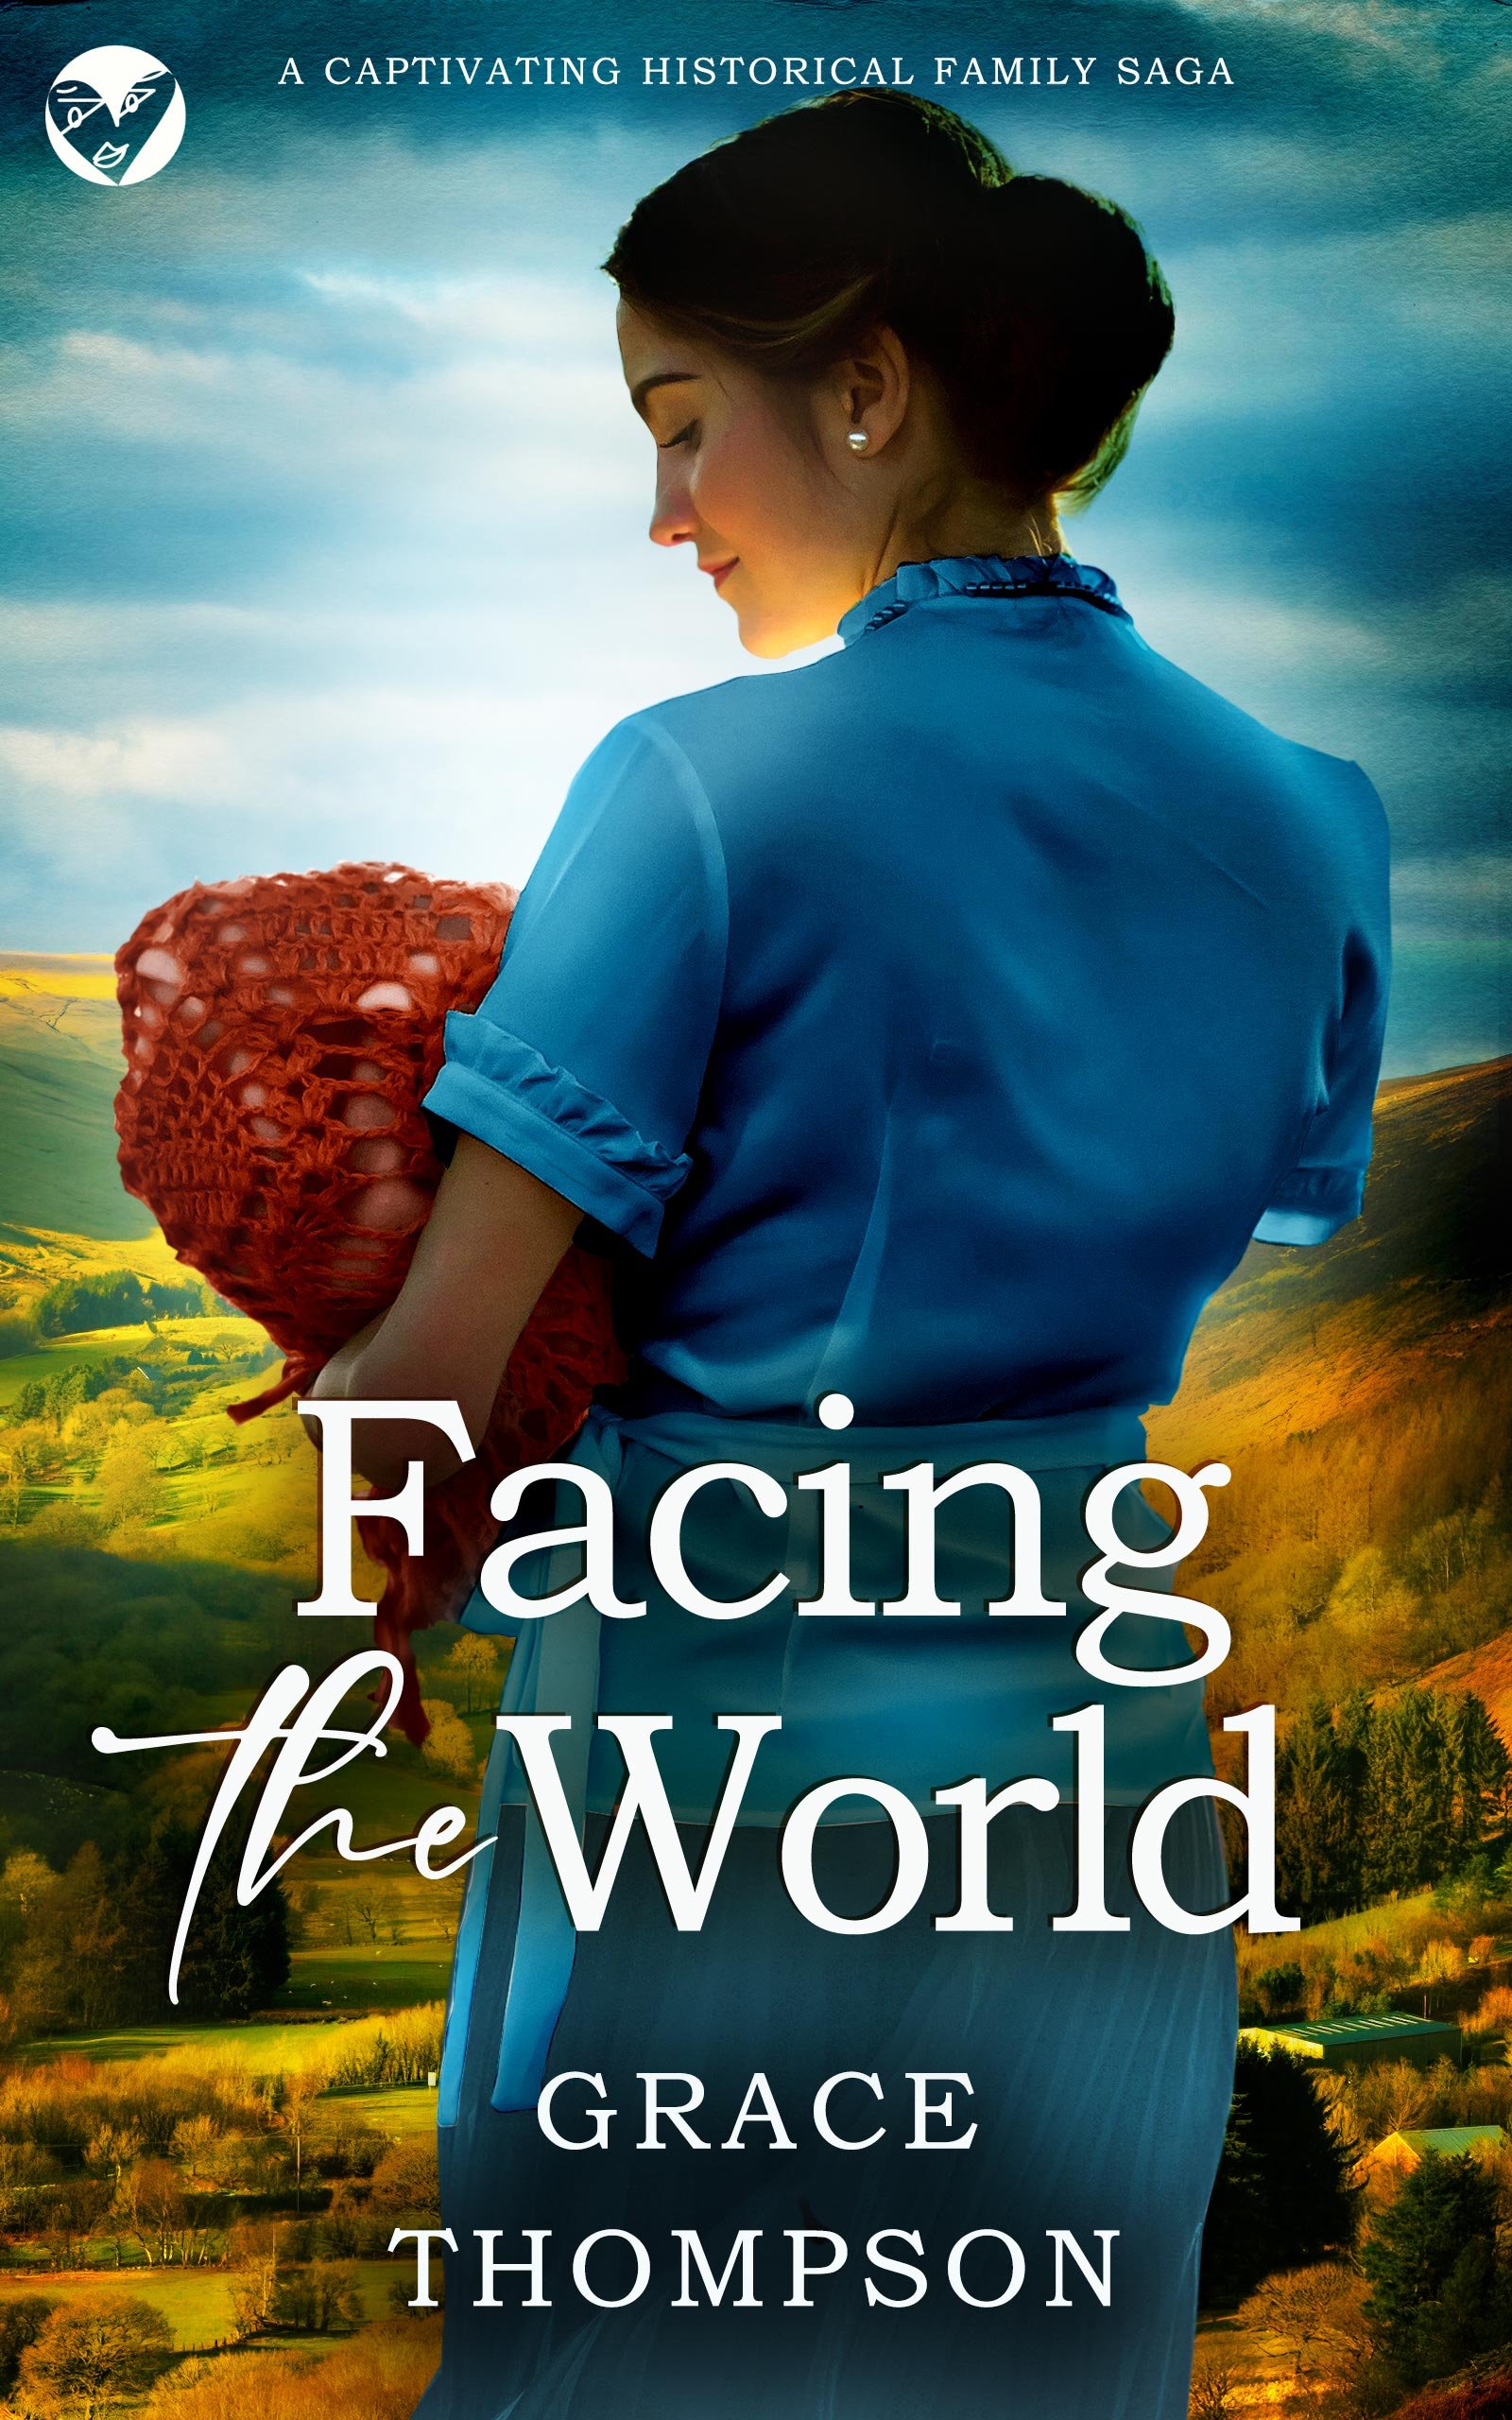 FACING THE WORLD Cover publish 603KB.jpg